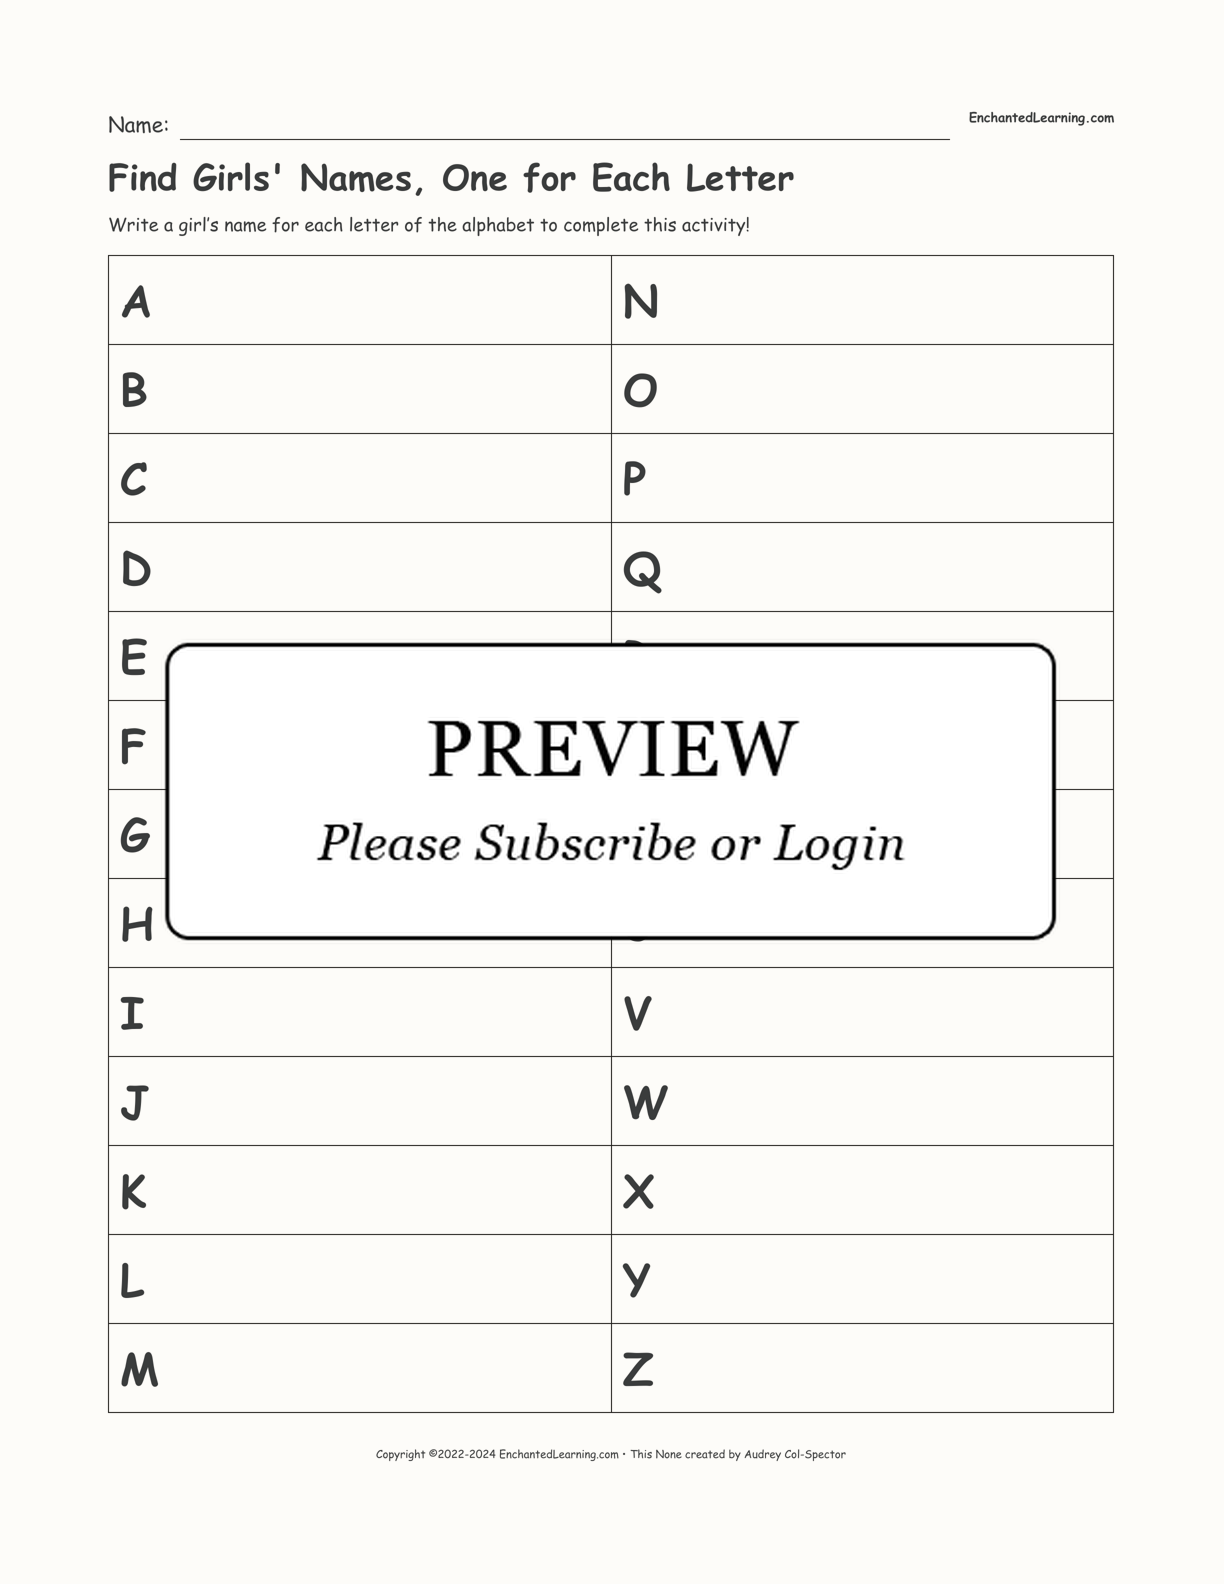 Find Girls' Names, One for Each Letter interactive worksheet page 1